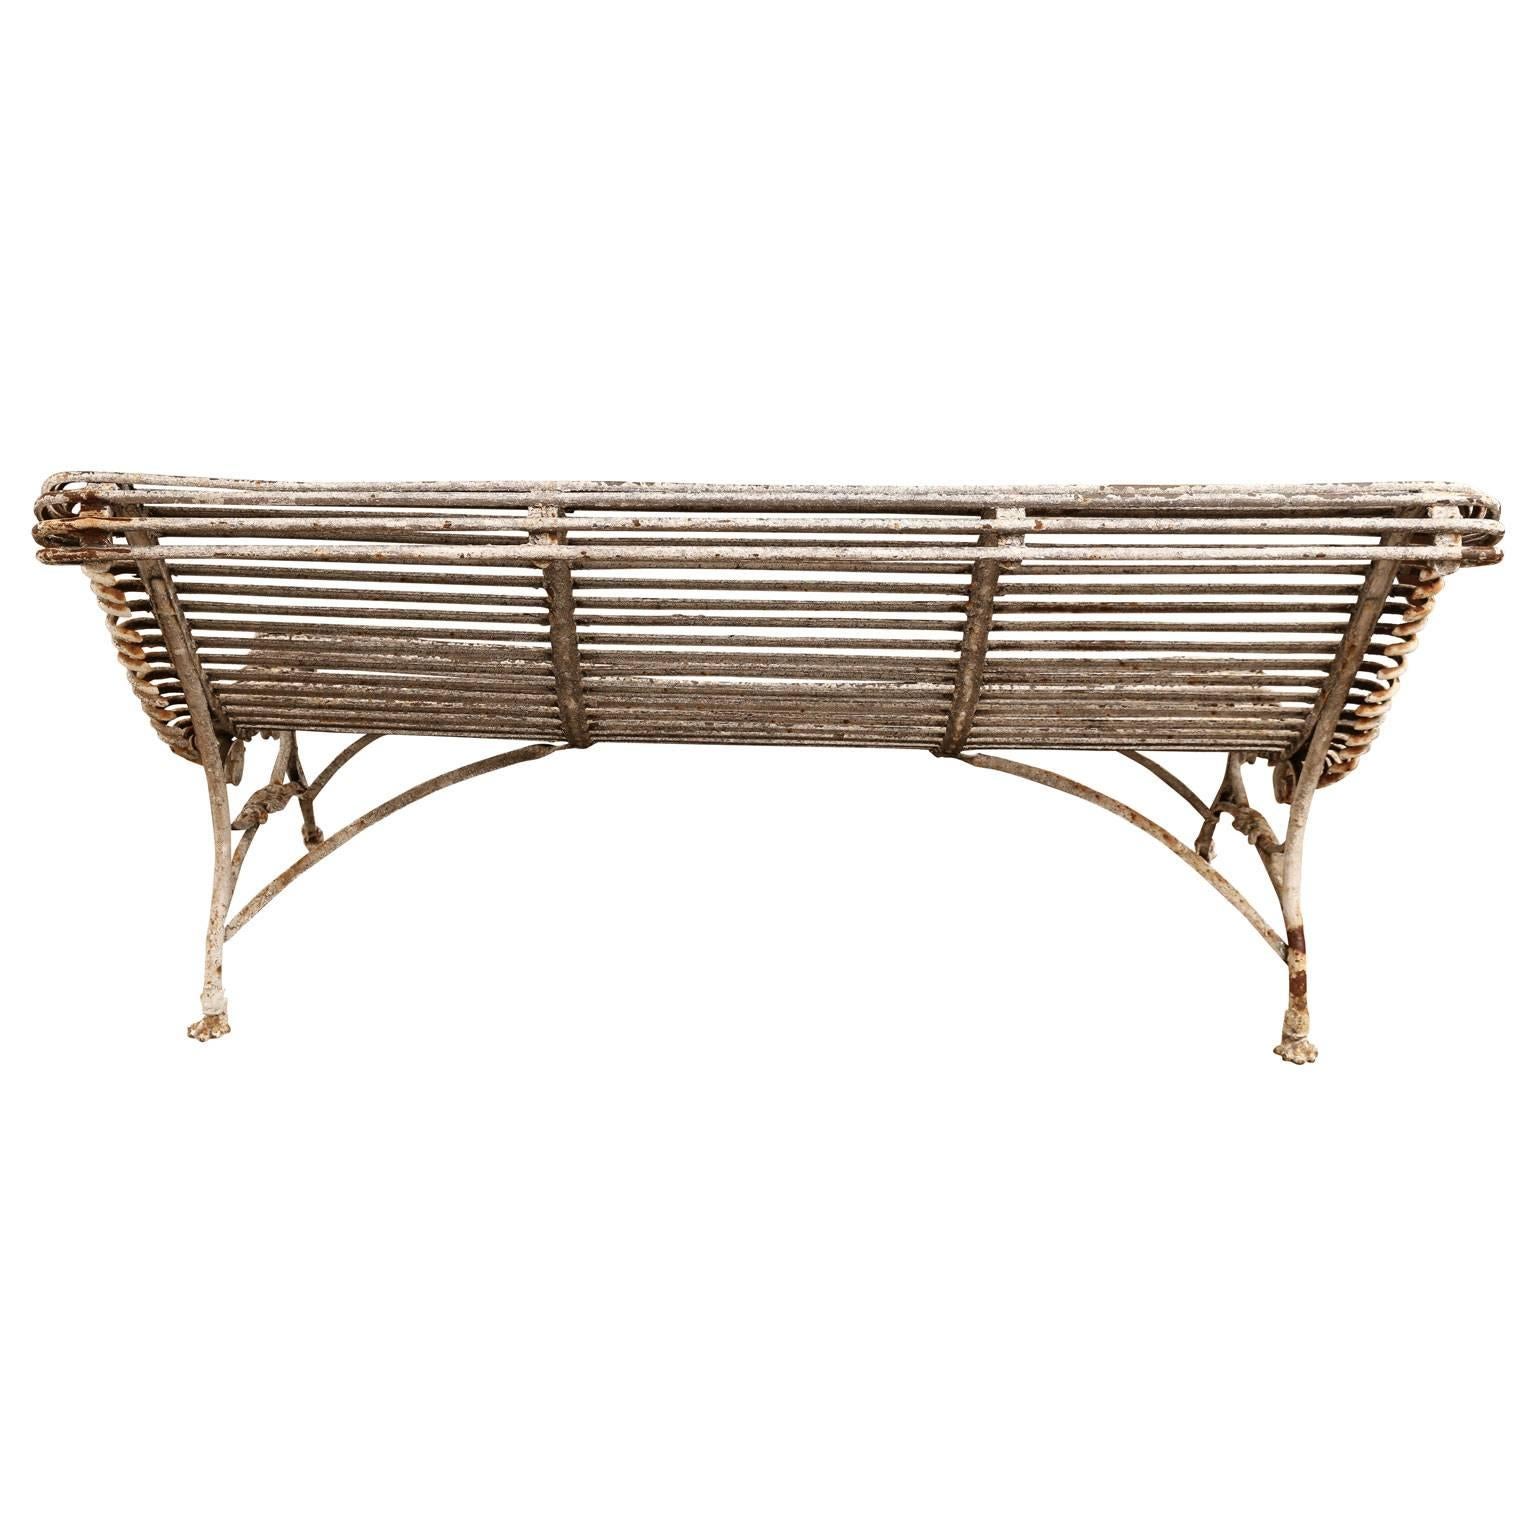 French Iron Garden Bench by Arras